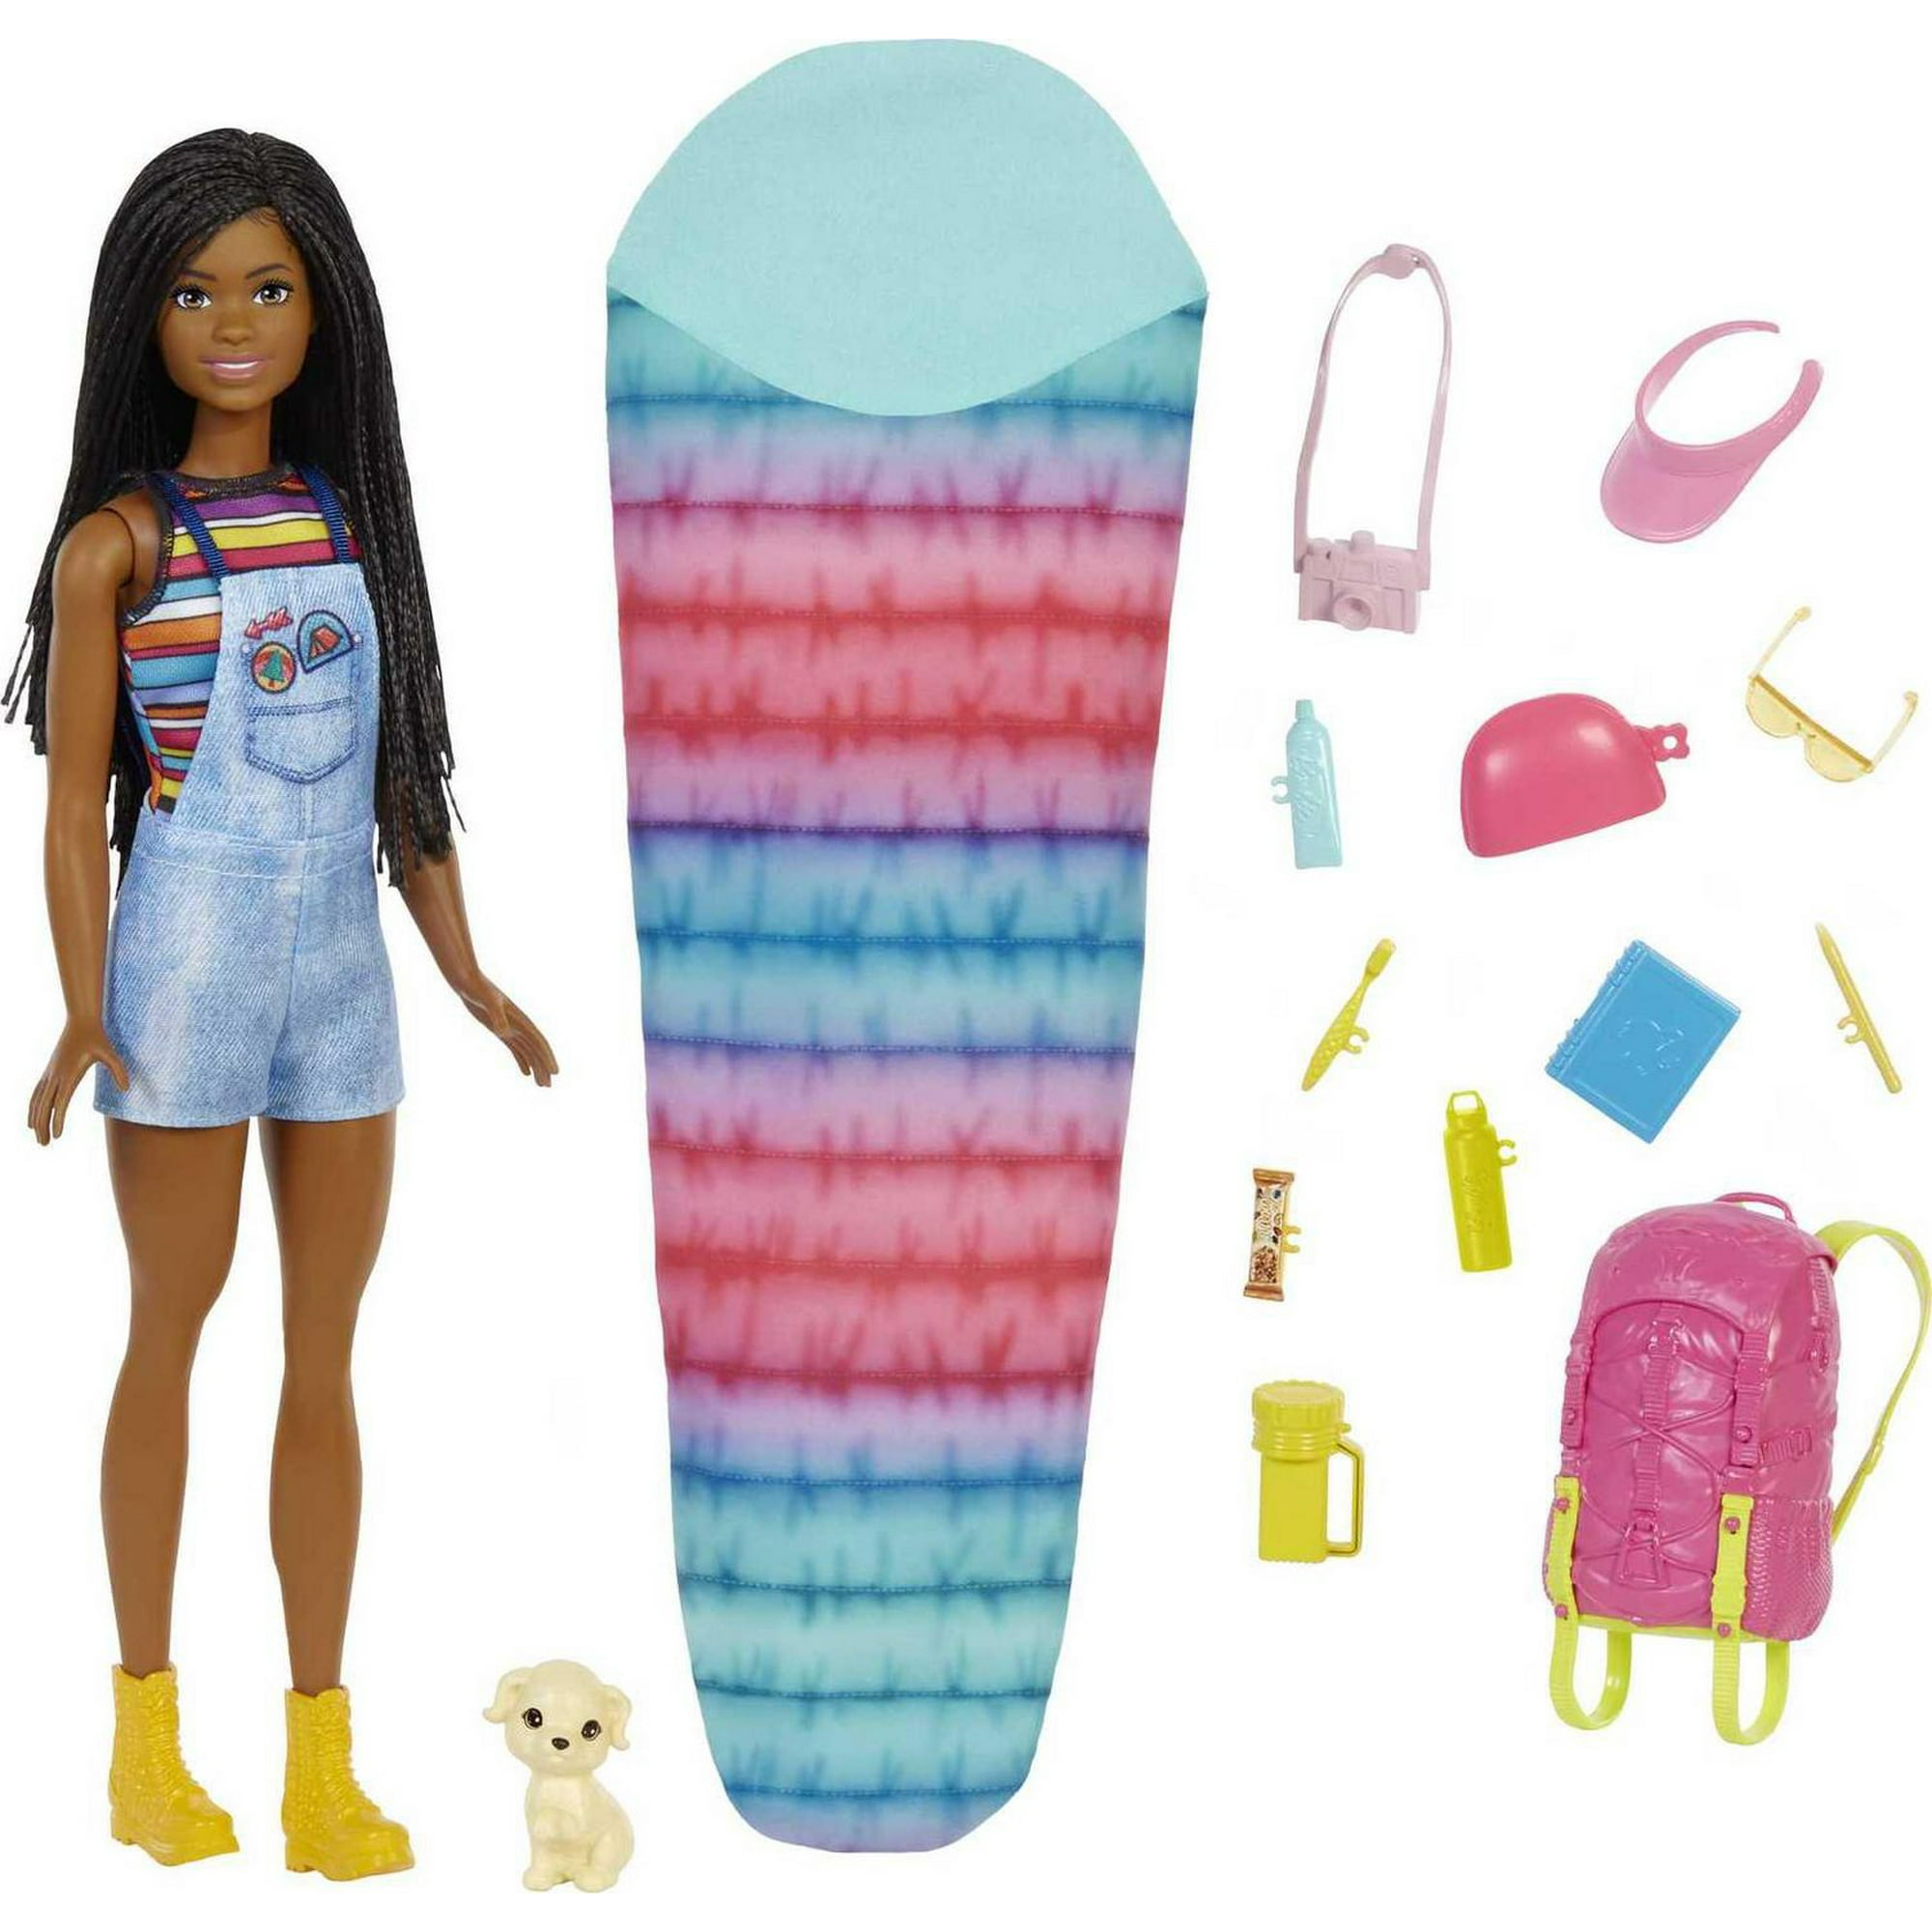 Barbie It Takes Two “Brooklyn” Camping Doll (11.5 in Brunette with Braids)  with Pet Puppy, Backpack, Sleeping Bag & 10 Camping Accessories, Gift for 3  to 7 Year Olds 